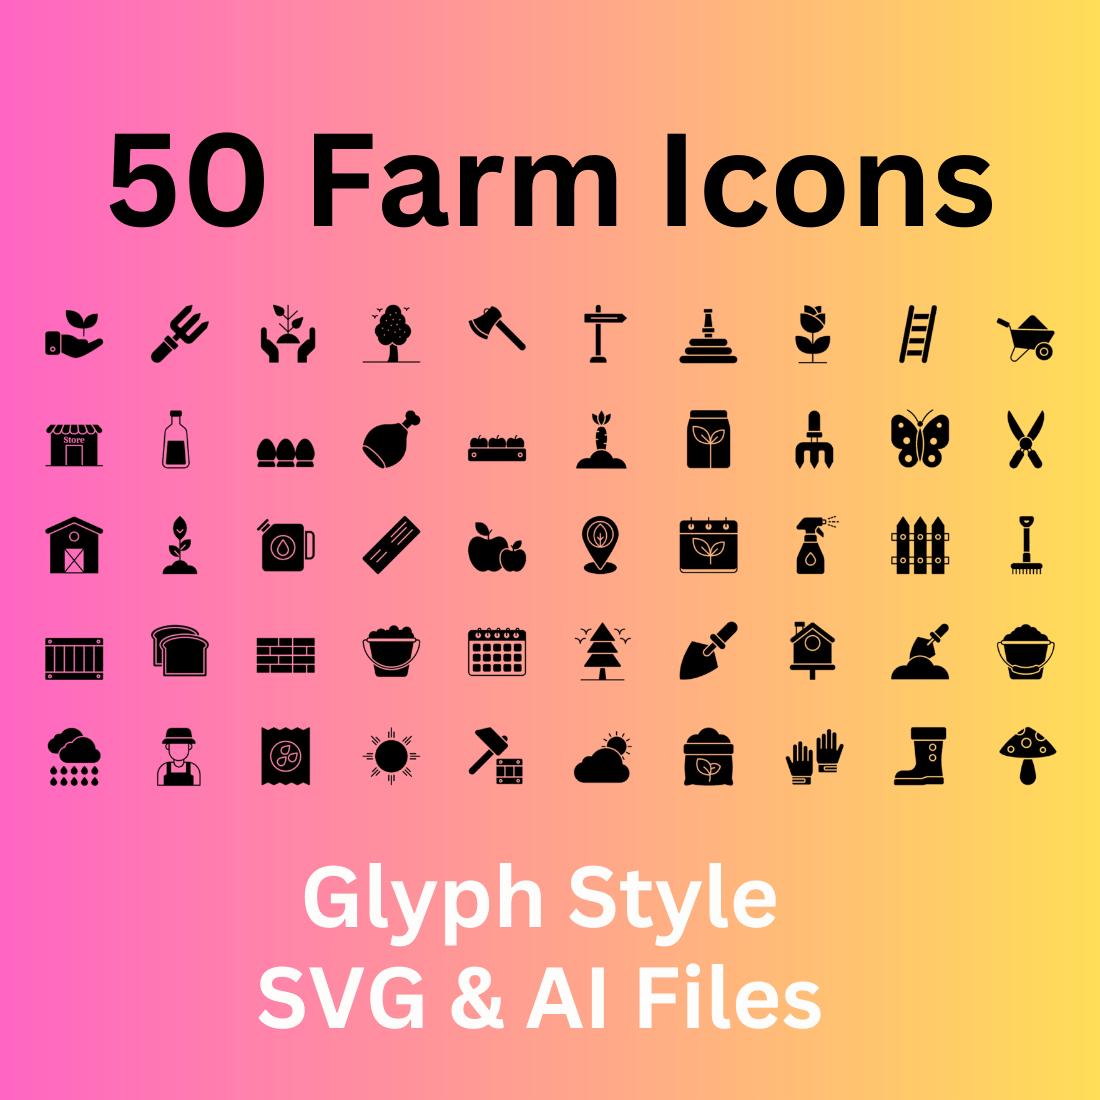 Farm Icon Set 50 Glyph Icons - SVG And AI Files cover image.